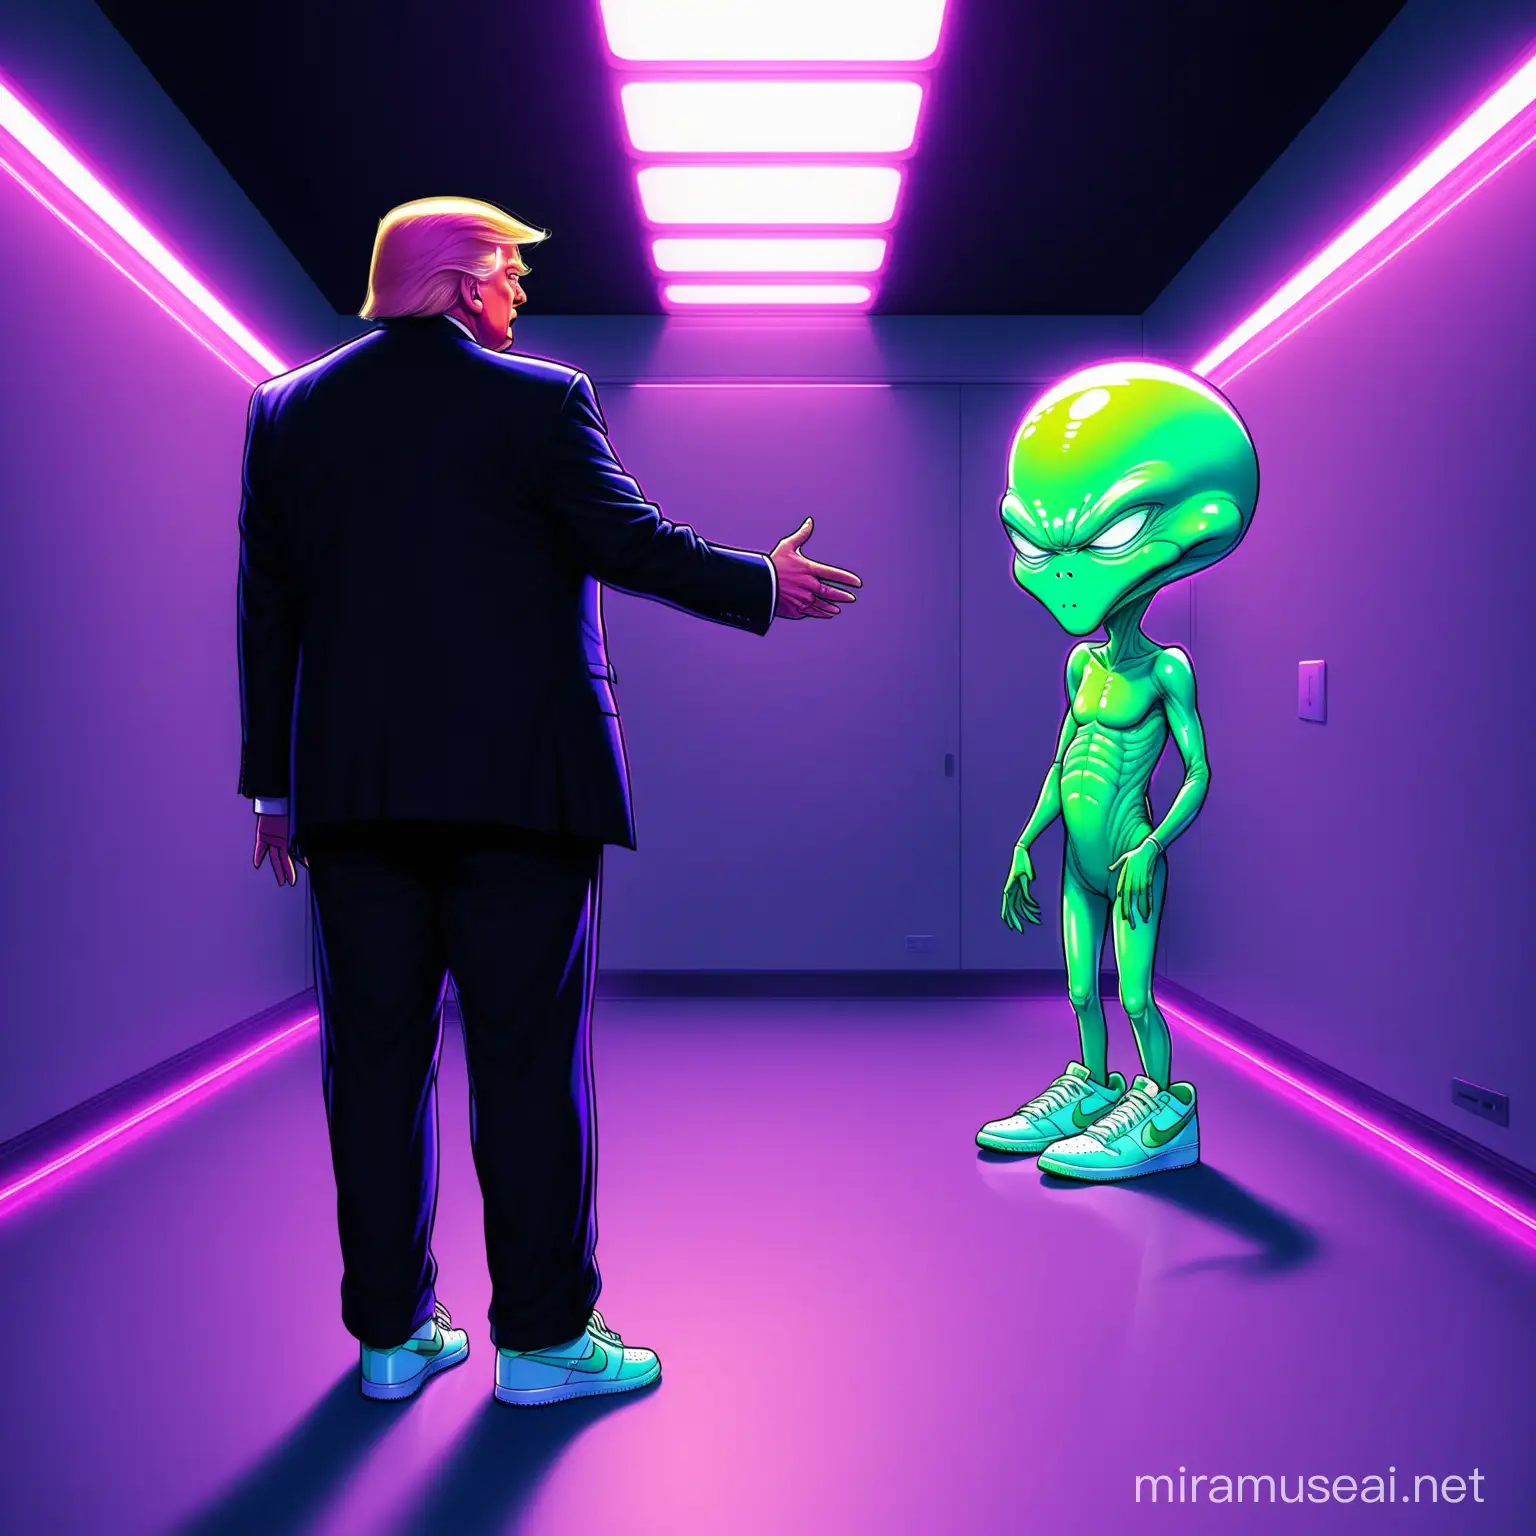 Presidential Encounter Donald Trump in Casual Sneakers with Alien in Futuristic Neonlit Space